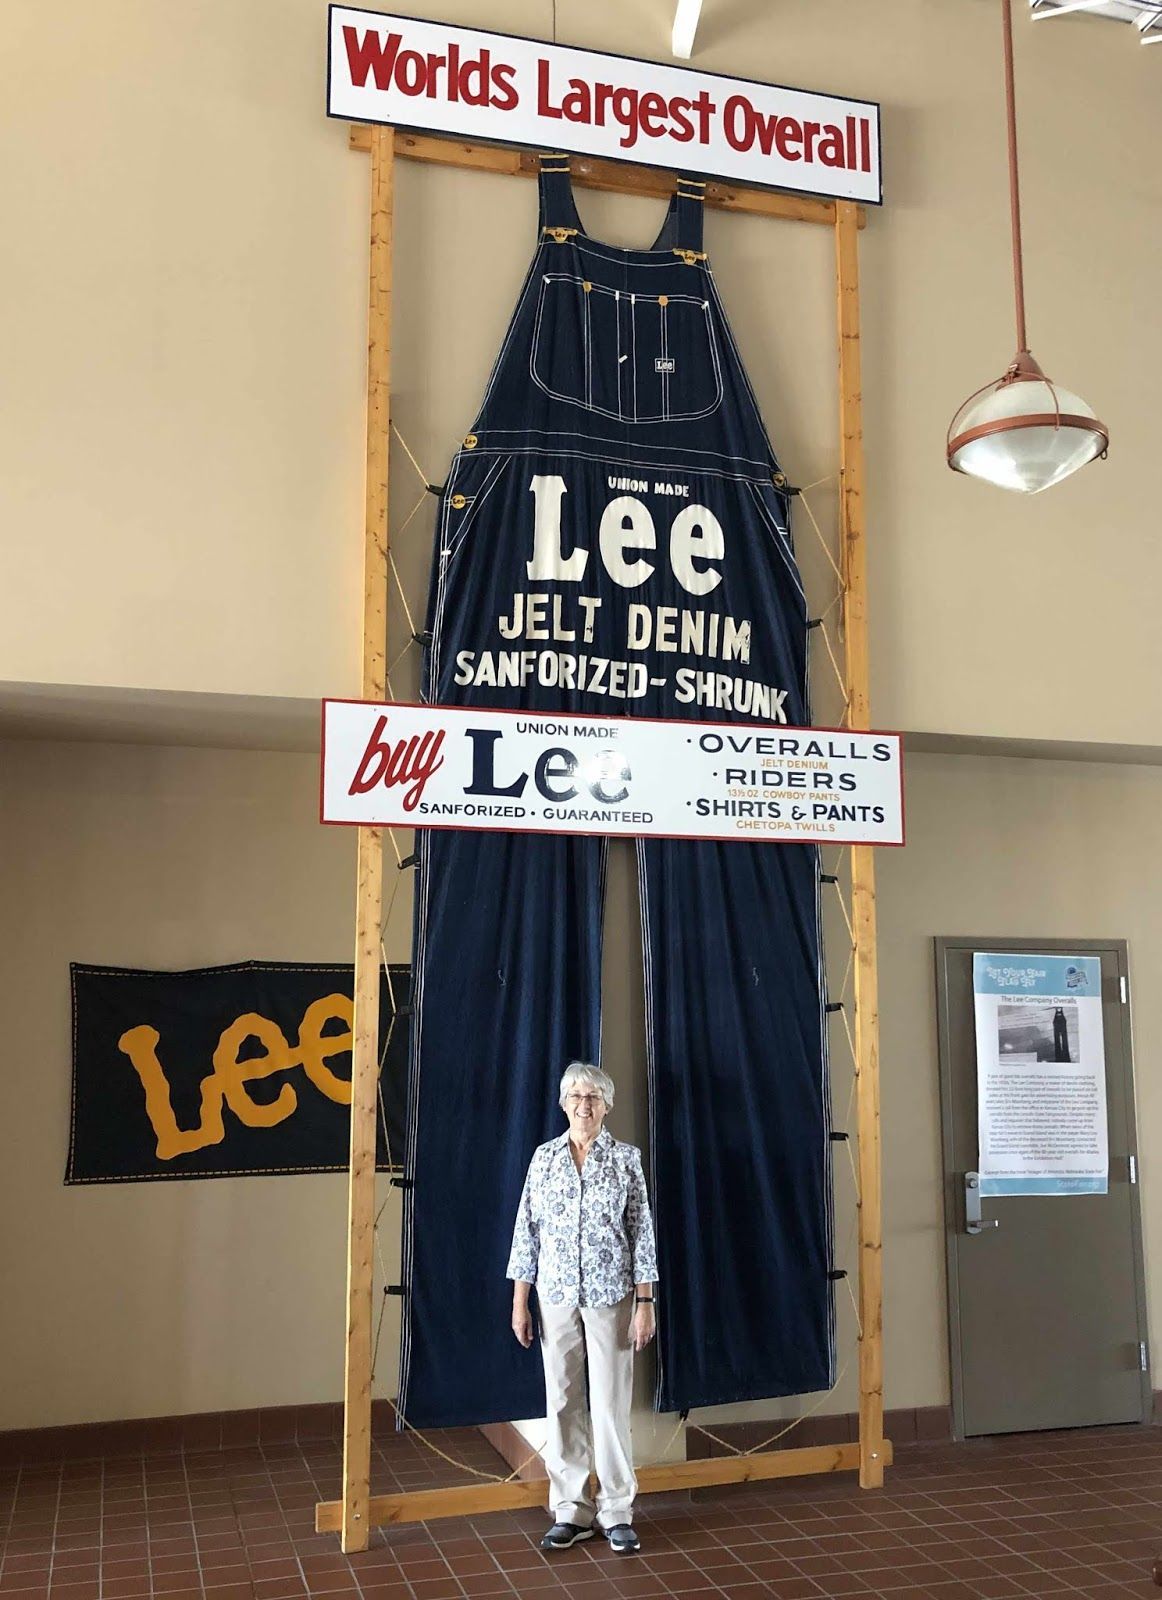 World's Largest Pair of Vintage Overalls